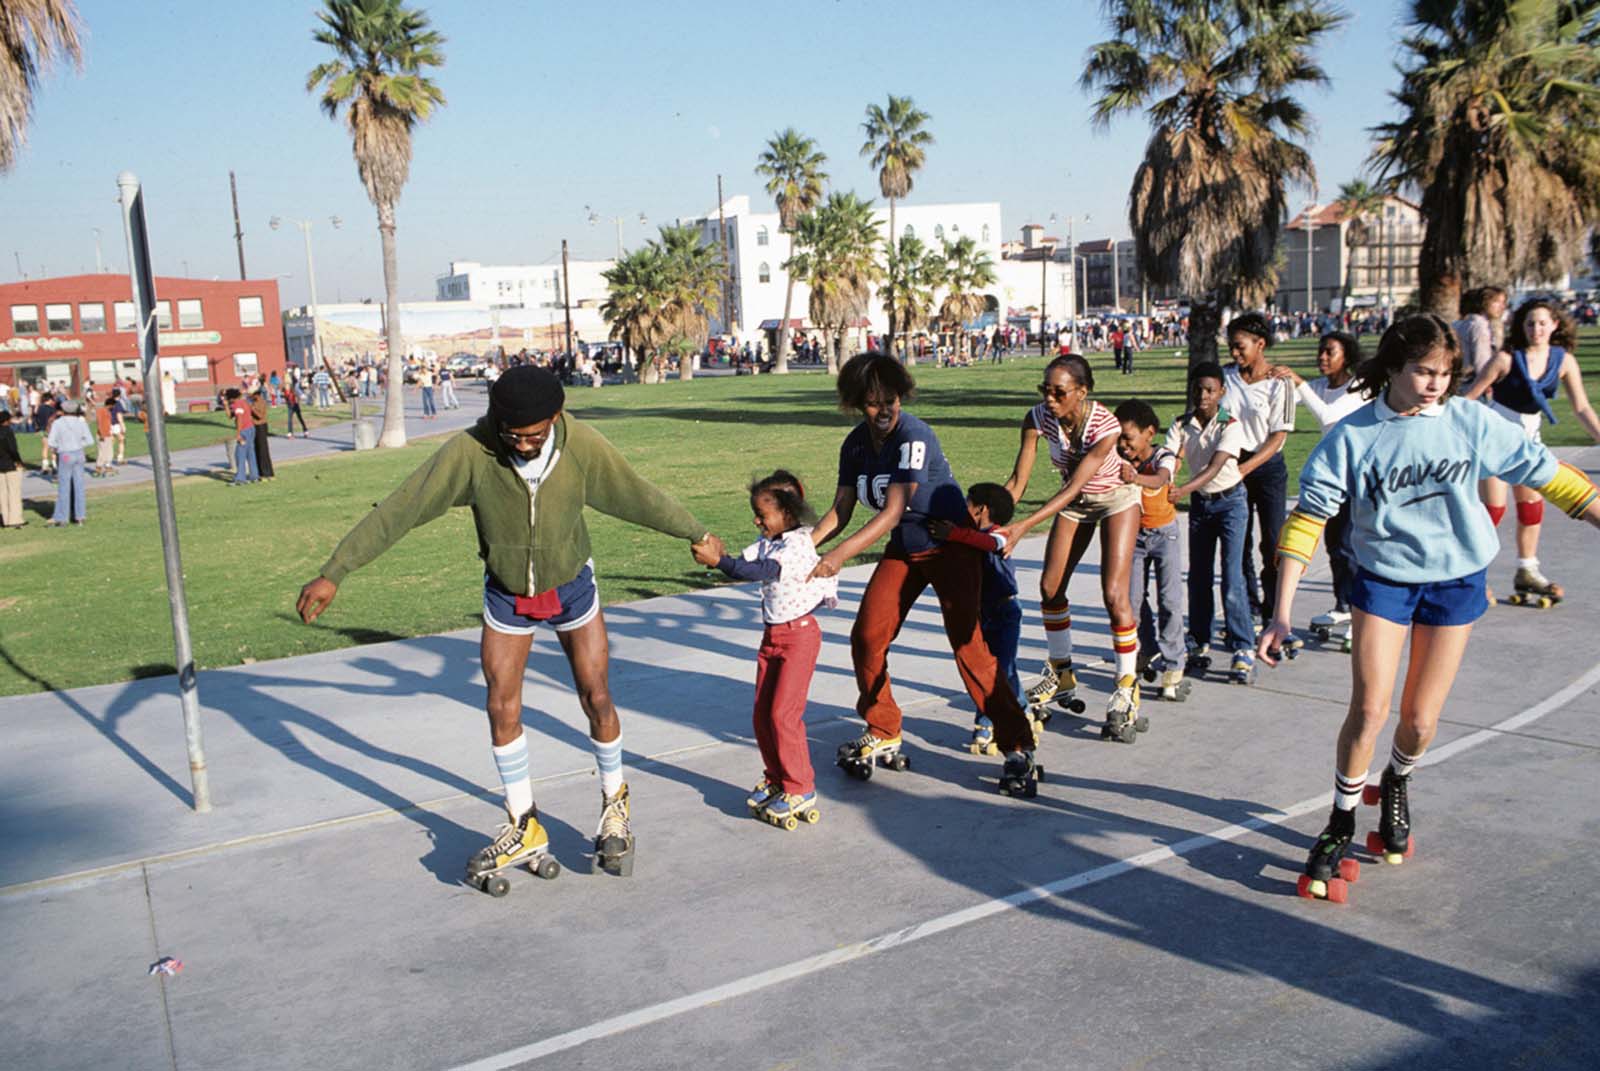 The roller skaters of Venice Beach, 1979